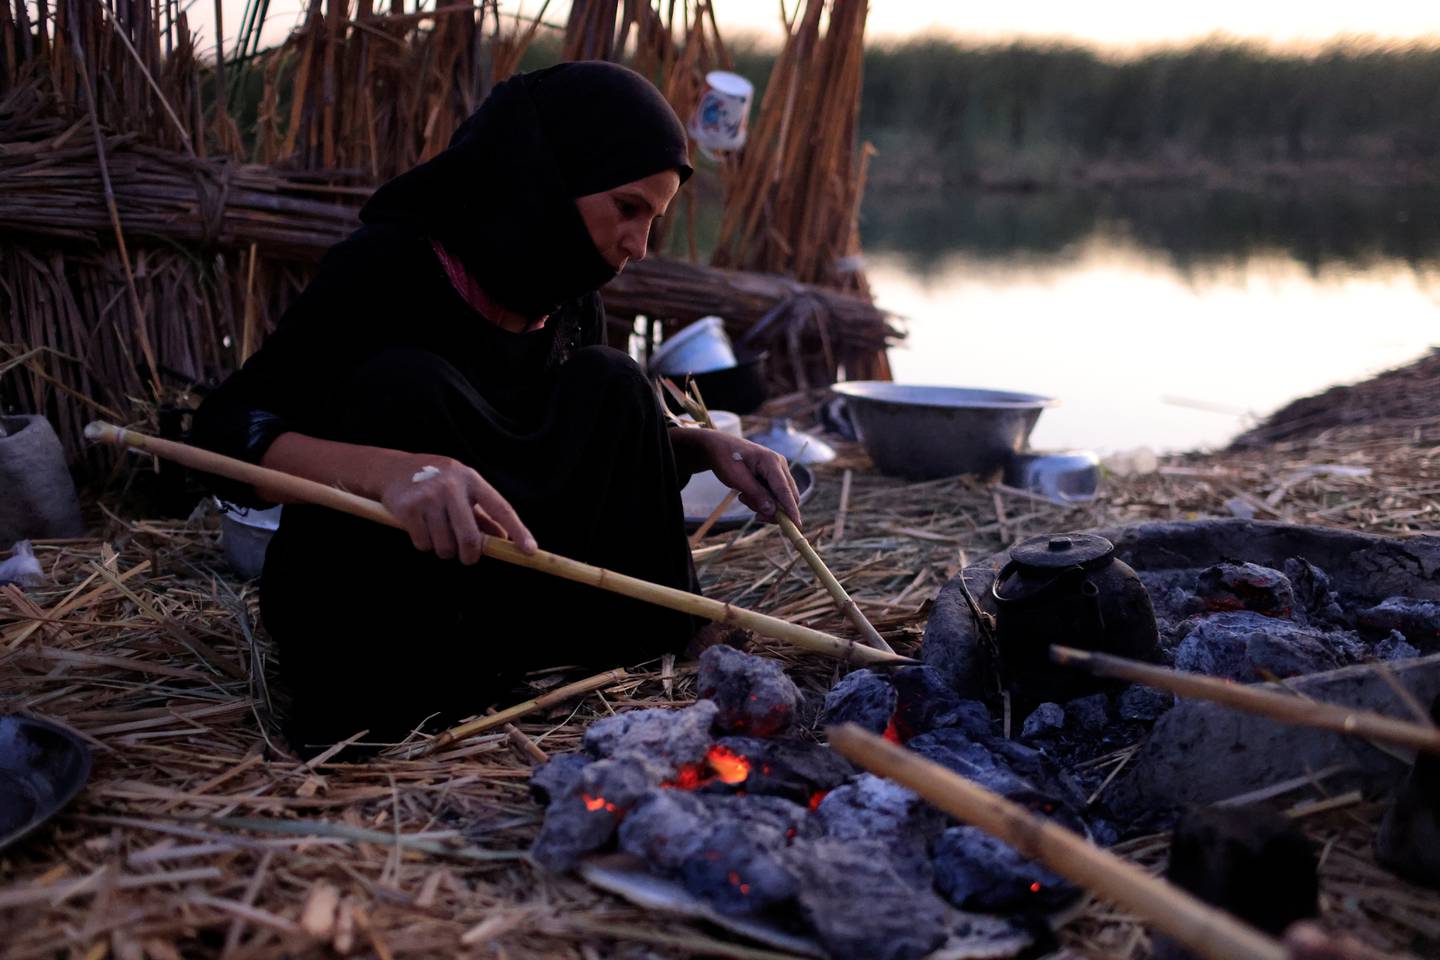 A woman makes breakfast at home in the Chebayesh marsh, Dhi Qar province, Iraq, August 15. Reuters